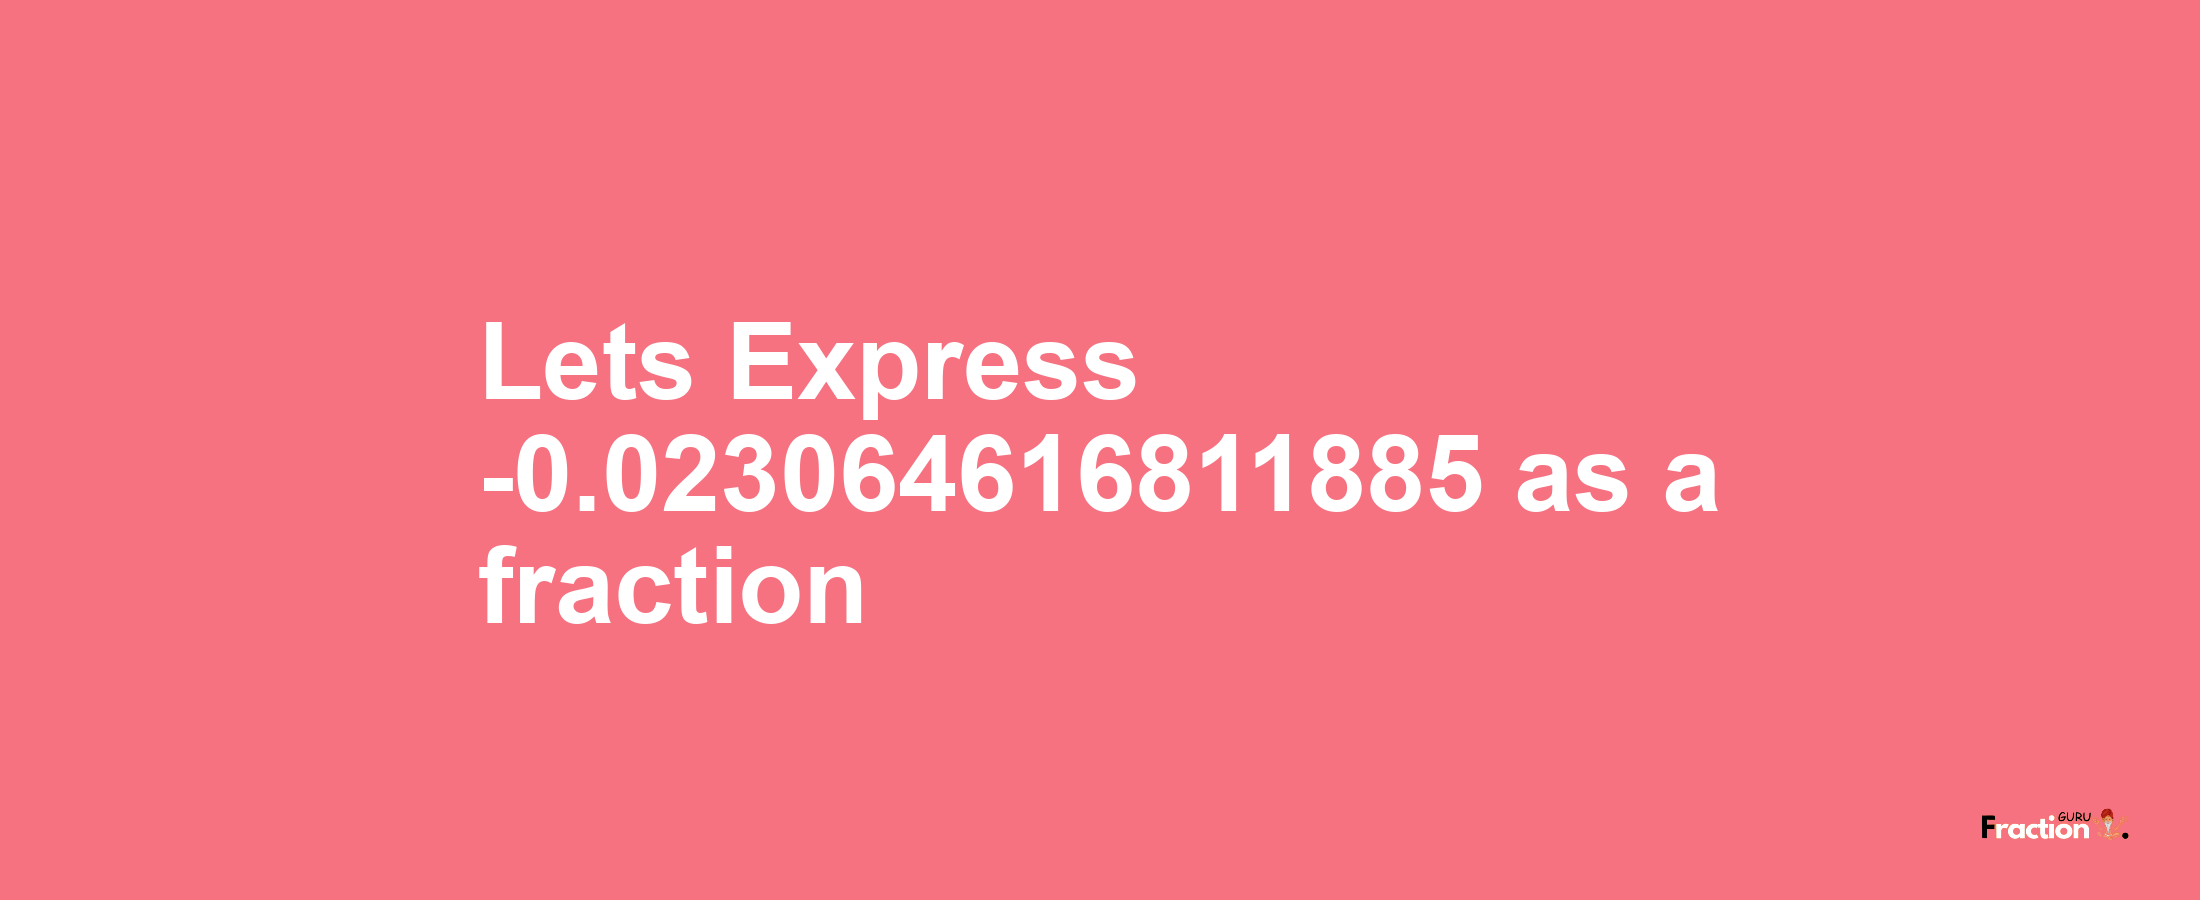 Lets Express -0.023064616811885 as afraction